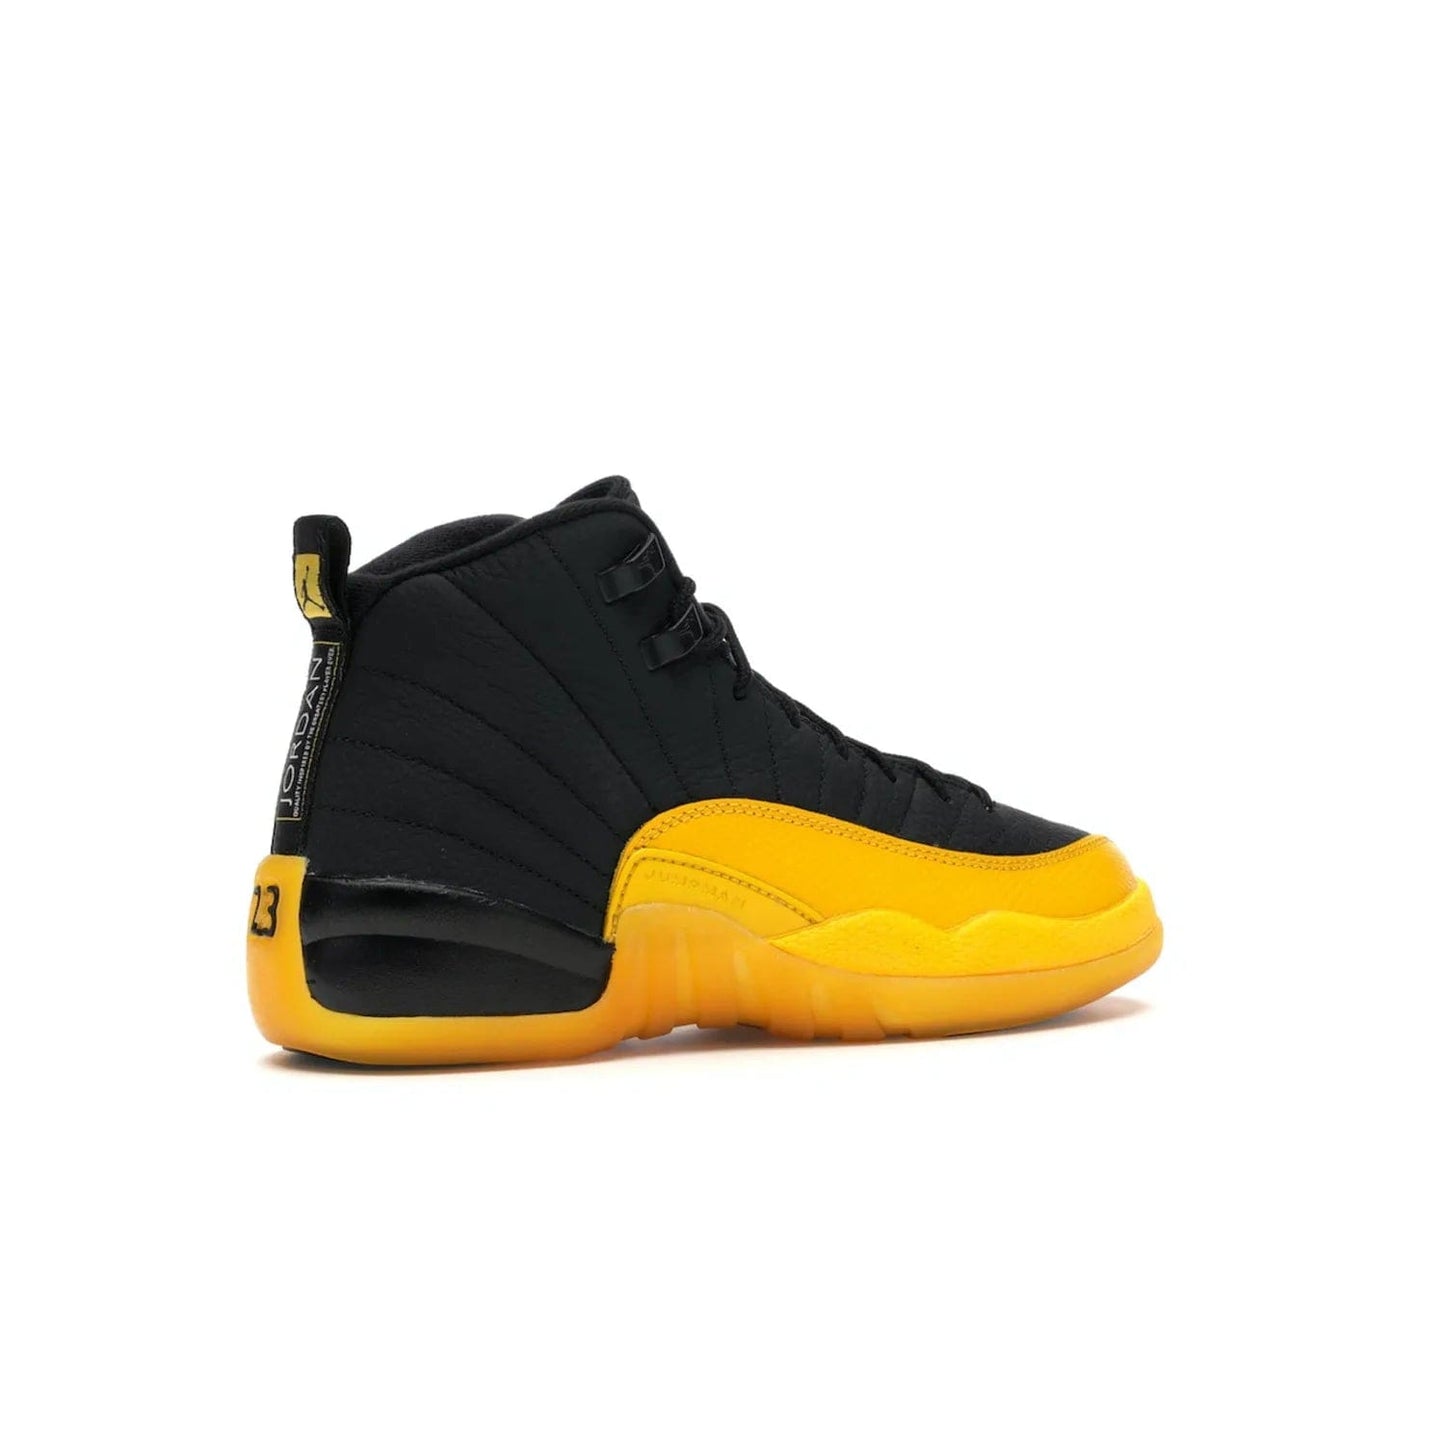 Jordan 12 Retro Black University Gold (GS) - Image 34 - Only at www.BallersClubKickz.com - Upgrade your kid's shoe collection with the Jordan 12 Retro Black University Gold. With classic style, black tumbled leather upper, and University Gold accents, it's a great summer look. Out July 2020.